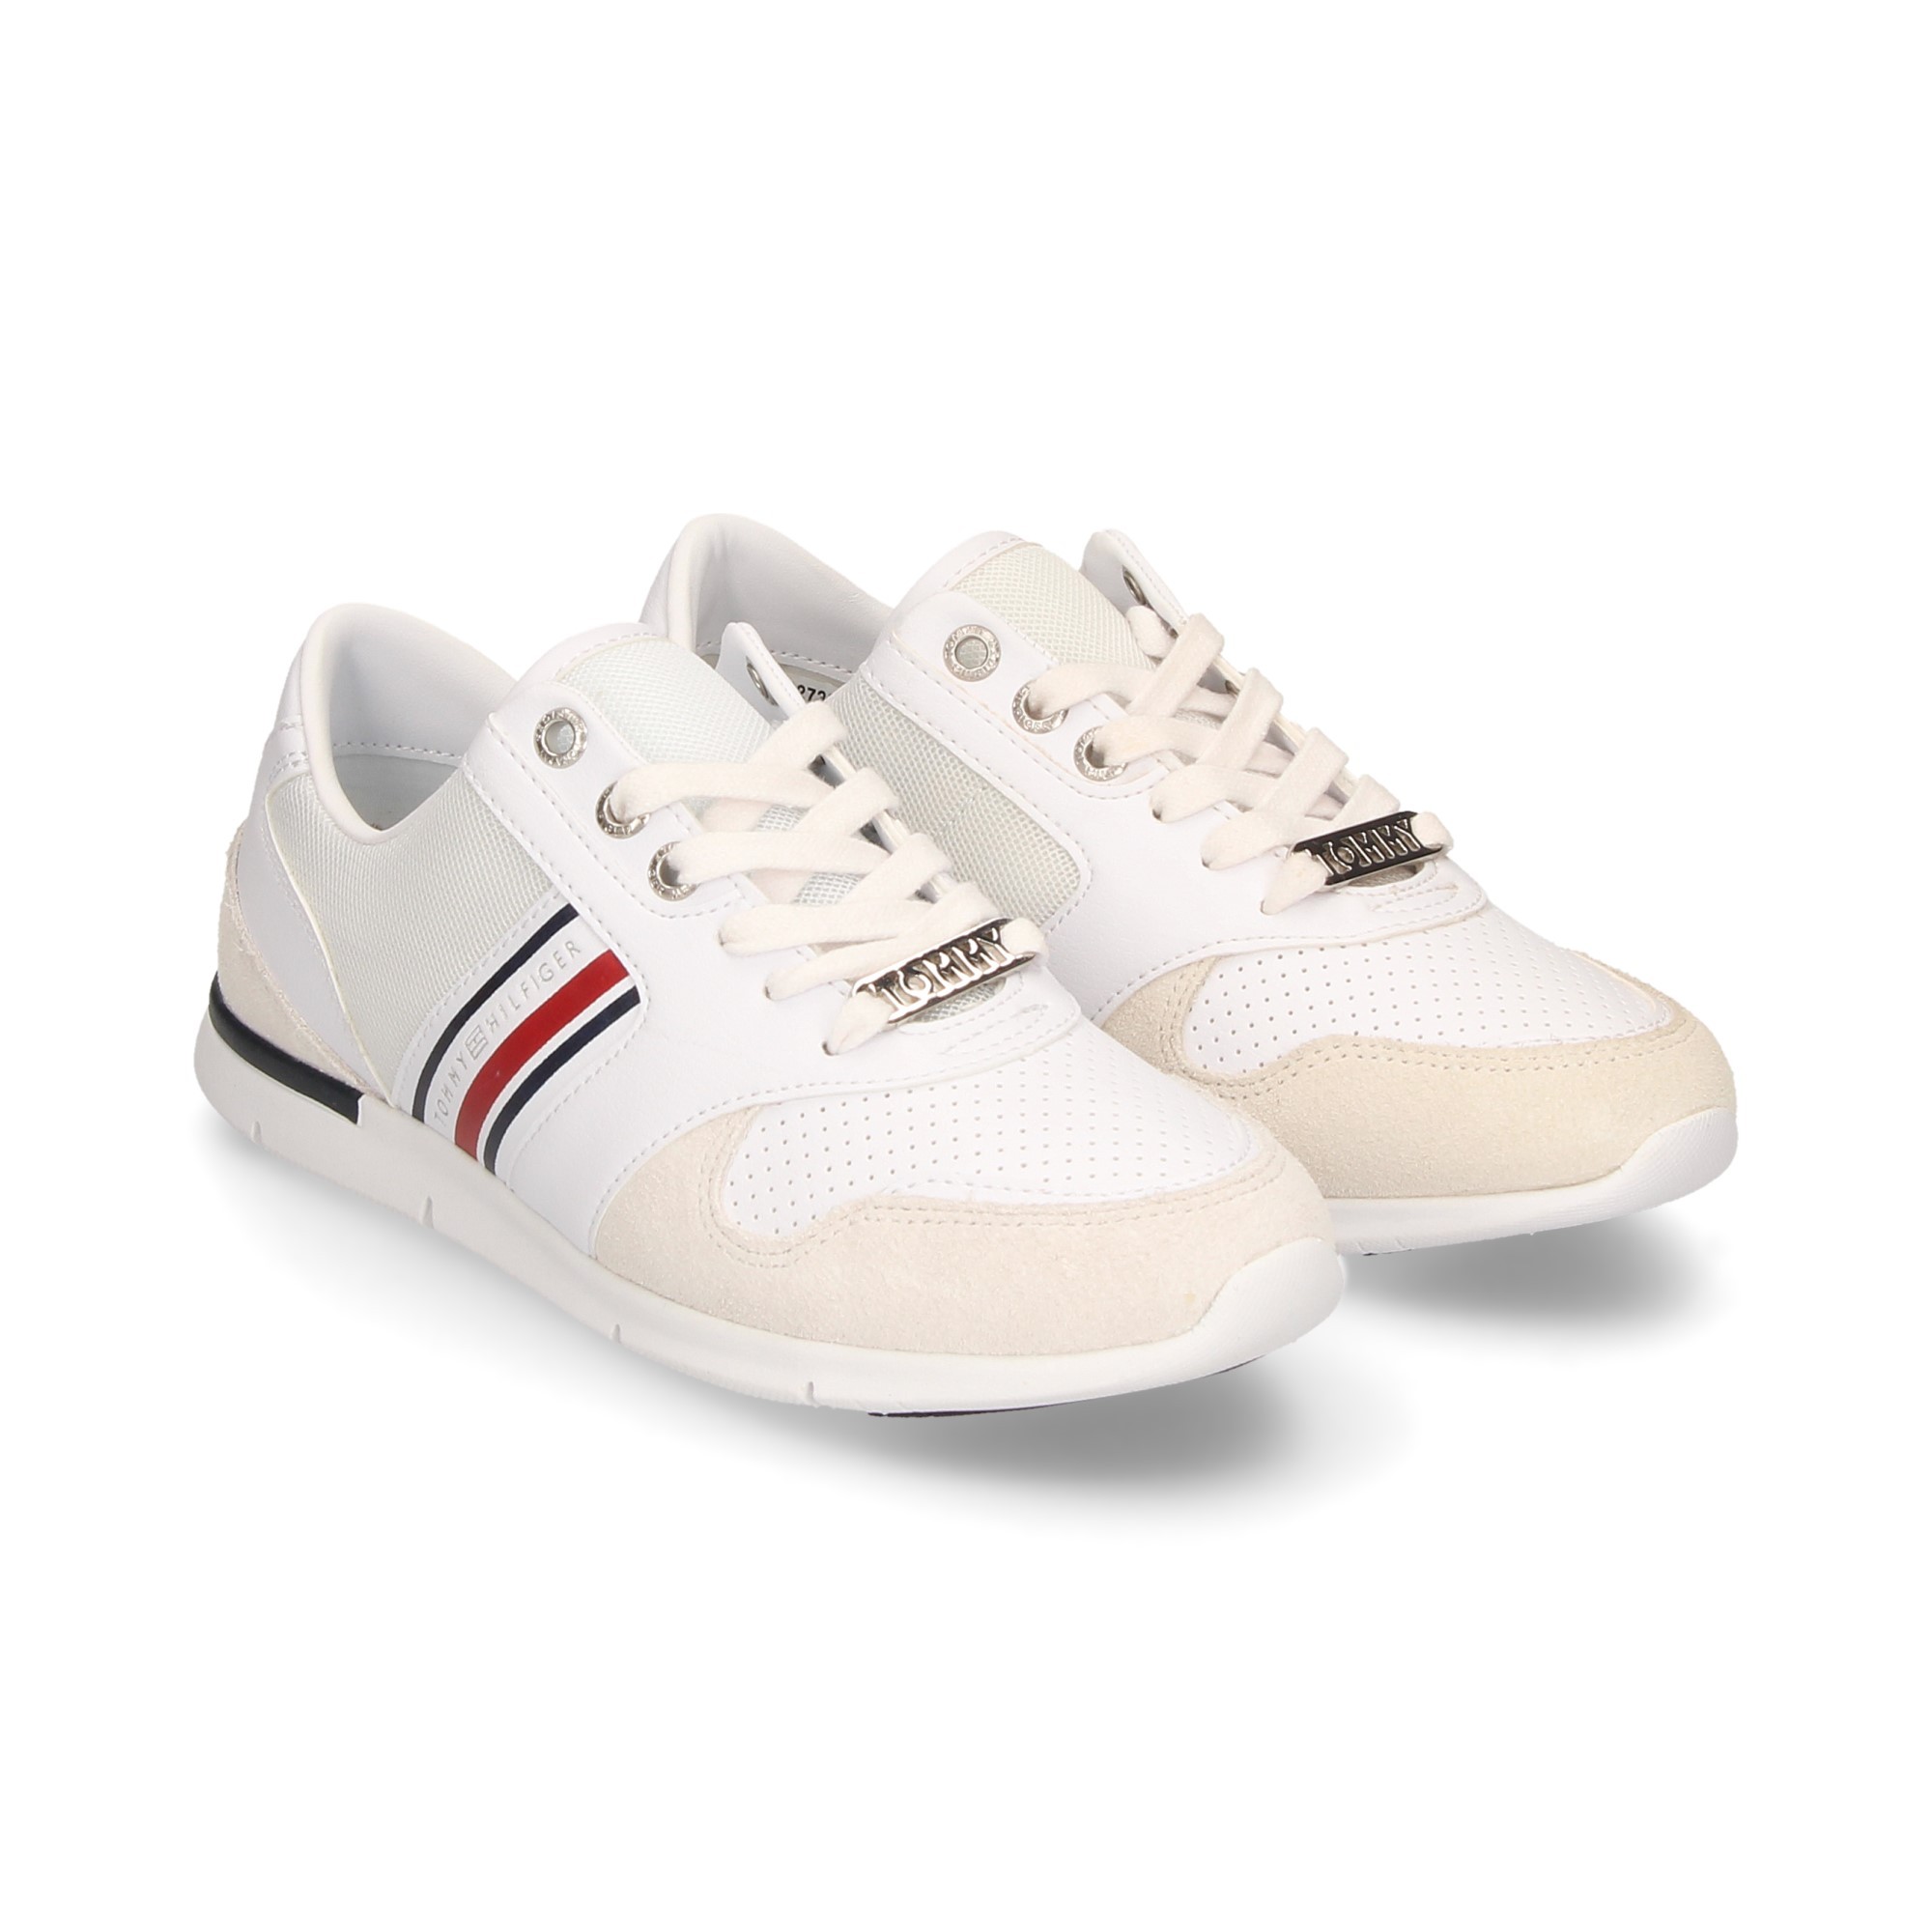 sporty-suede-white-perforated-skin